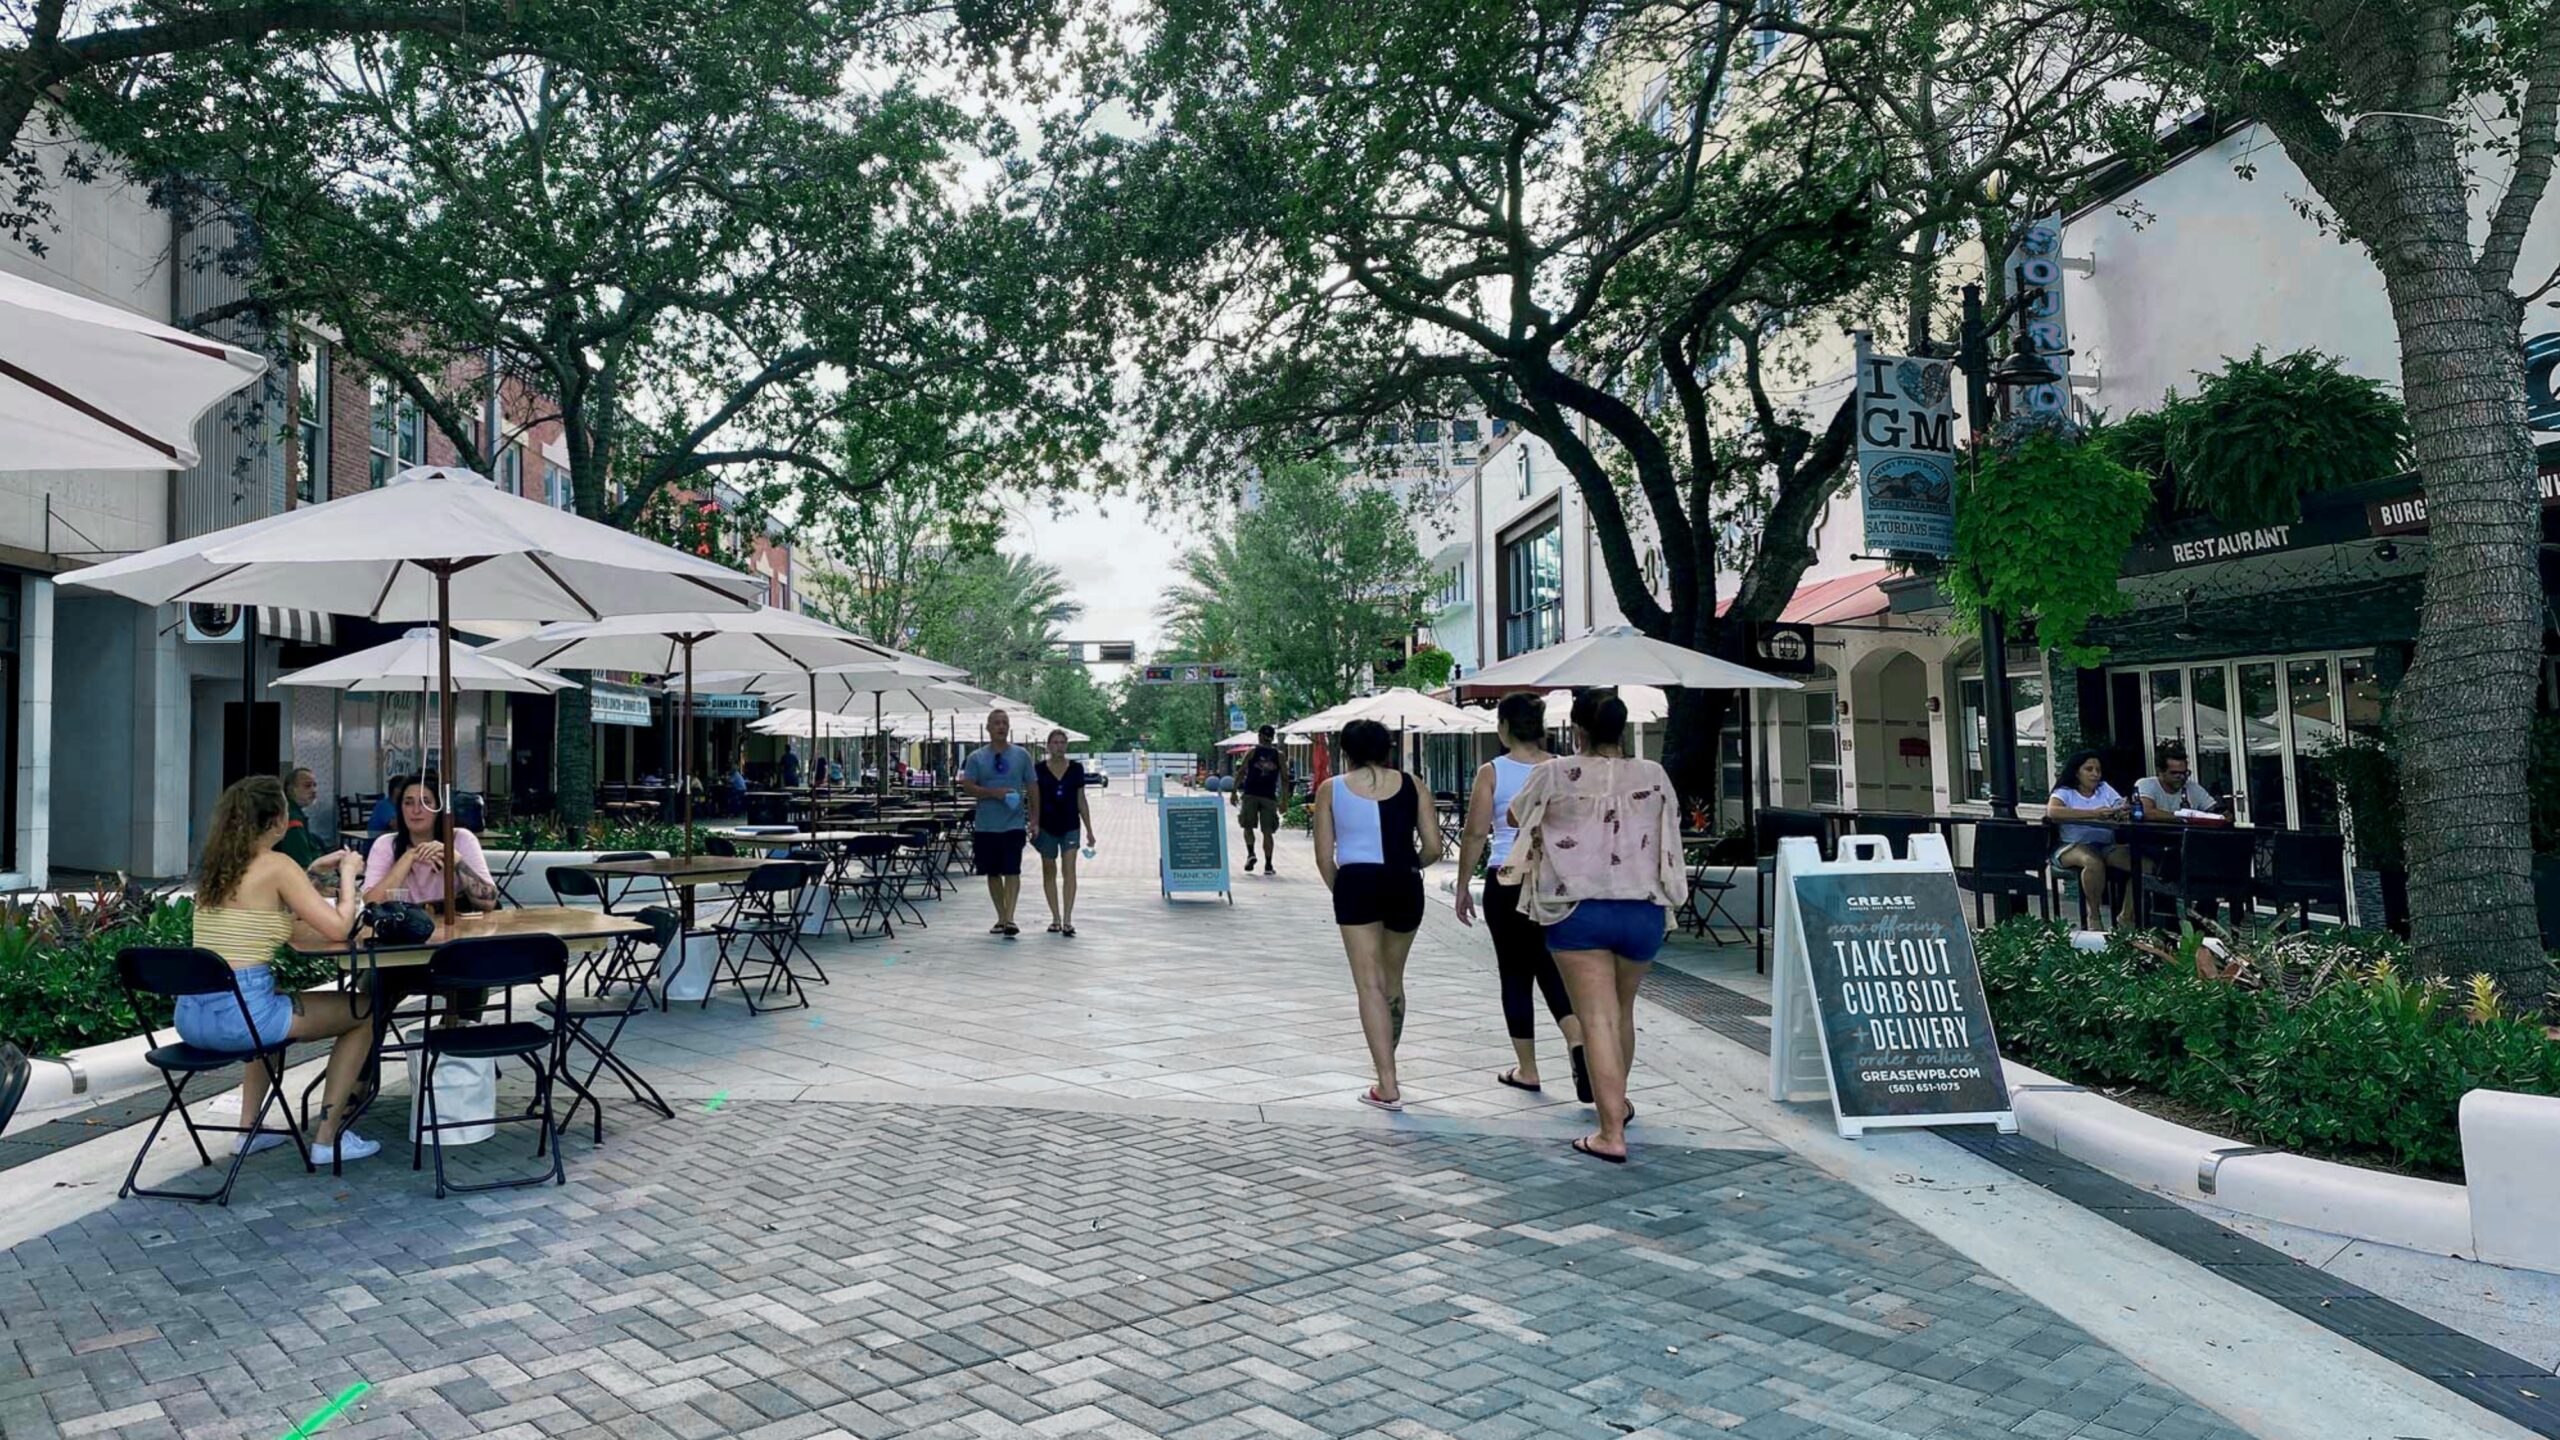 Giving Up More Freedoms?: The First Car-Free Neighborhood Opens In The US - Harbingers Daily